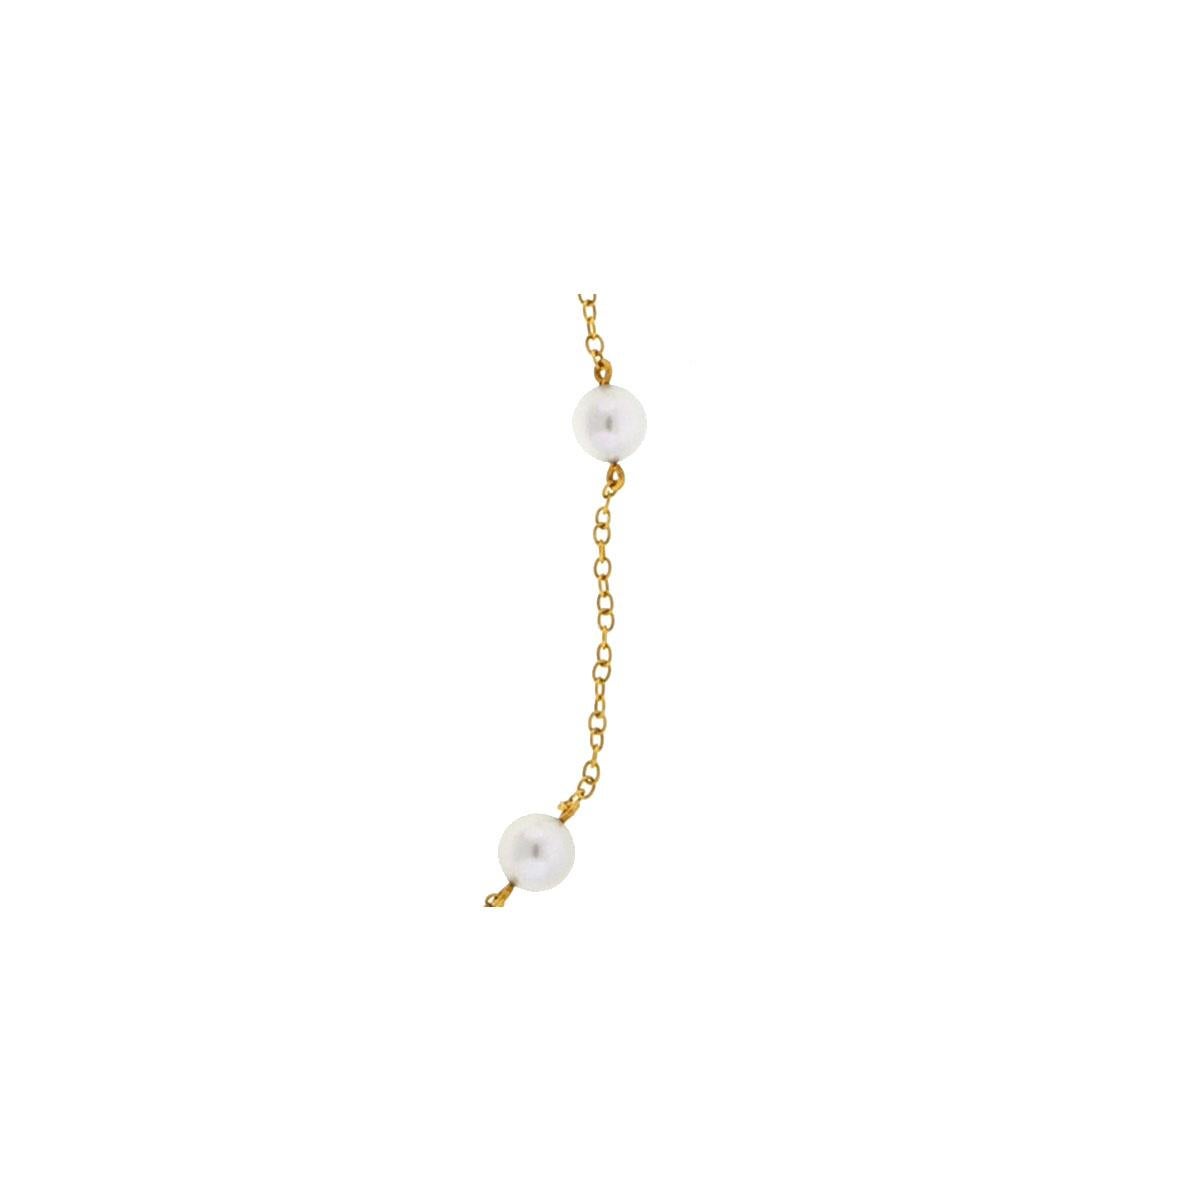 Mikimoto 18 Karat Yellow Gold with White Akoyo Cultured Pearls Station Necklace 1